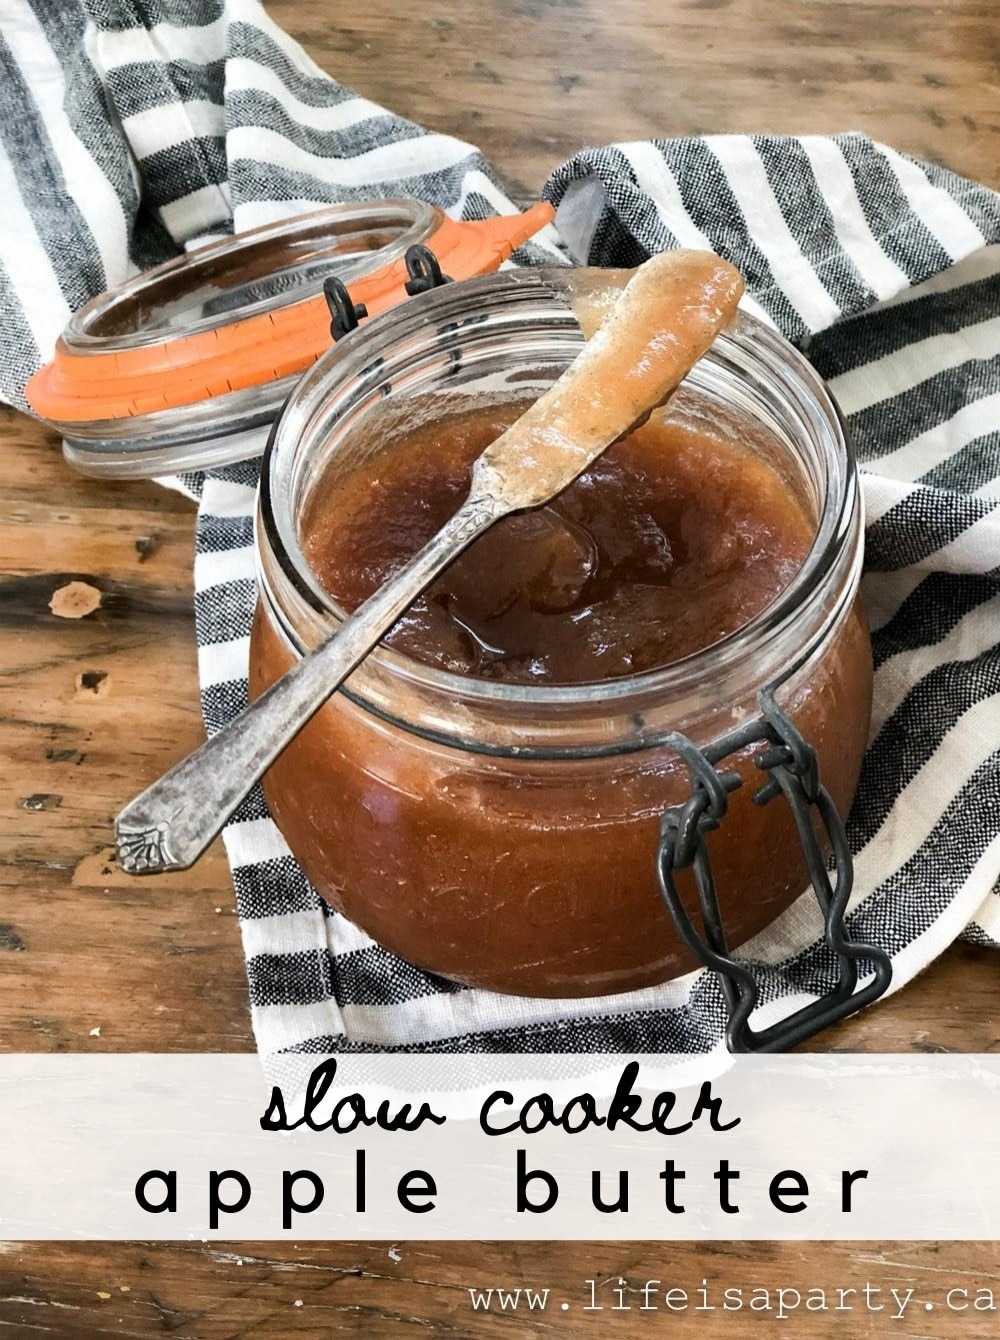 Slow Cooker Apple Butter: this easy recipe using the slow cooker to make delicious apple butter that is smooth, rich and delicious.